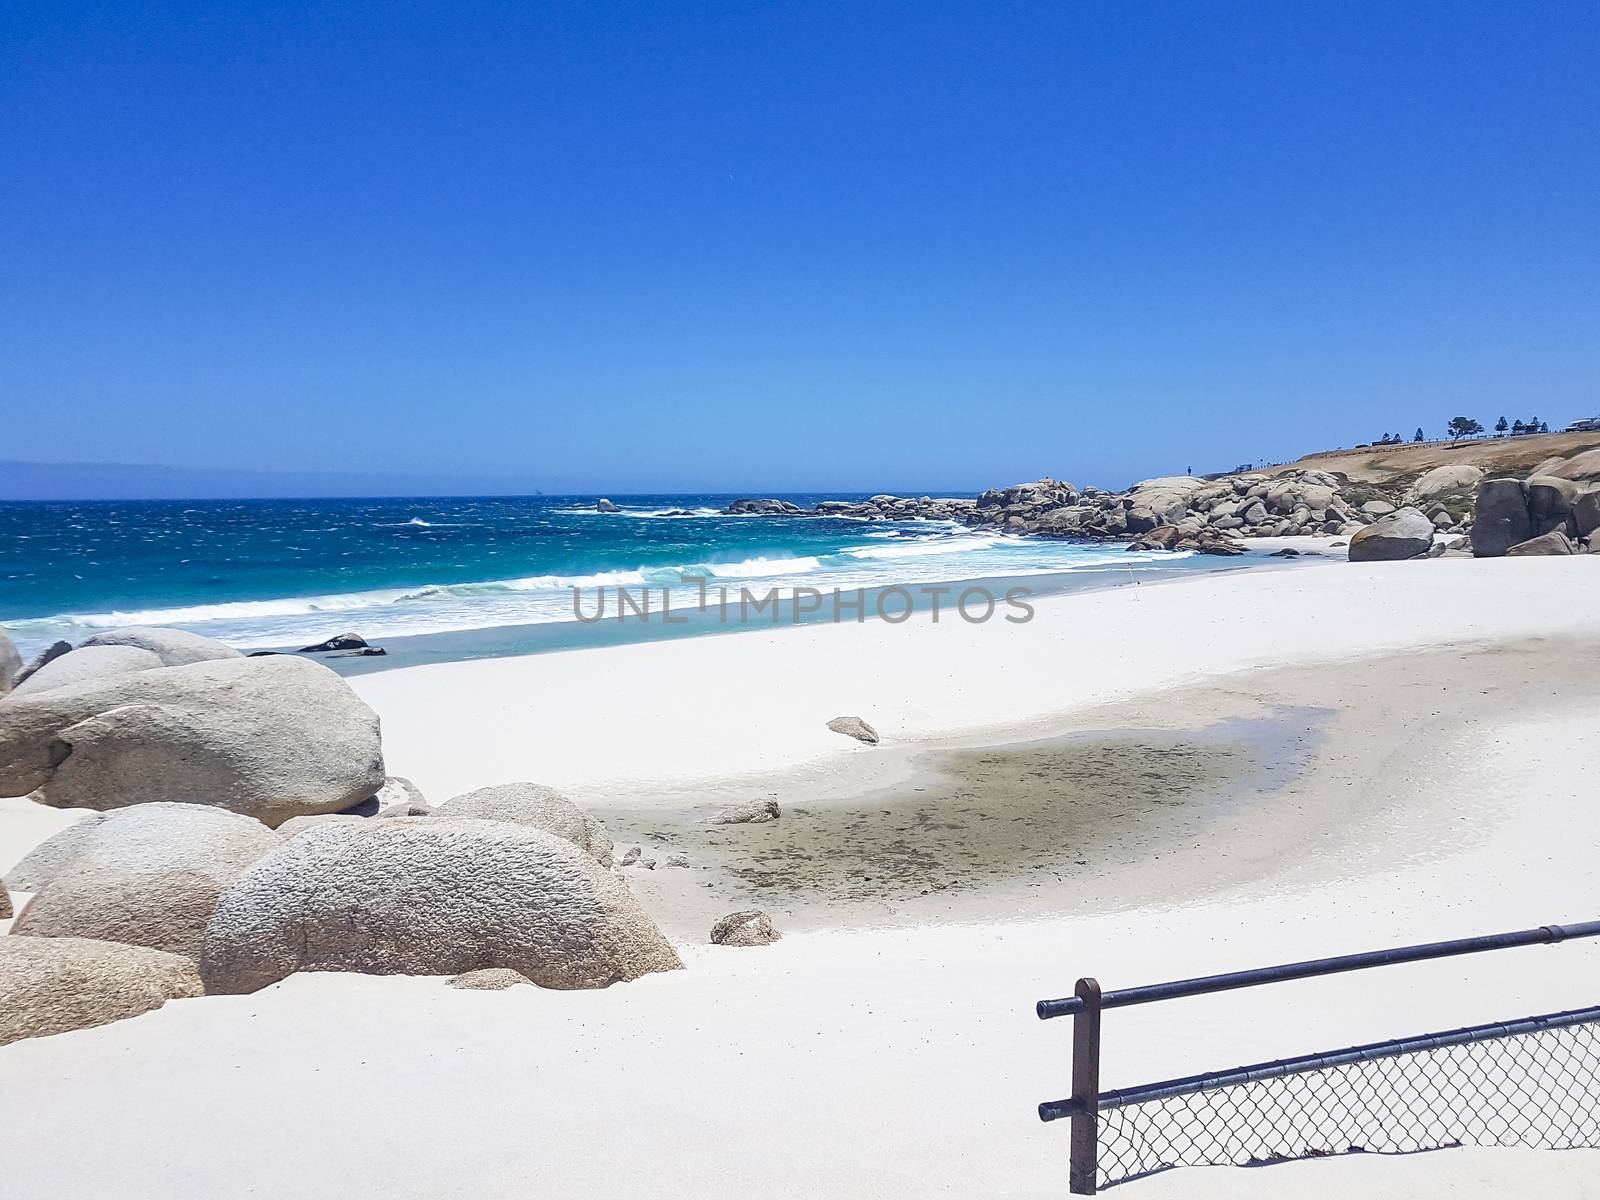 Camps Bay Beach behind fence and rocks, Cape Town. by Arkadij